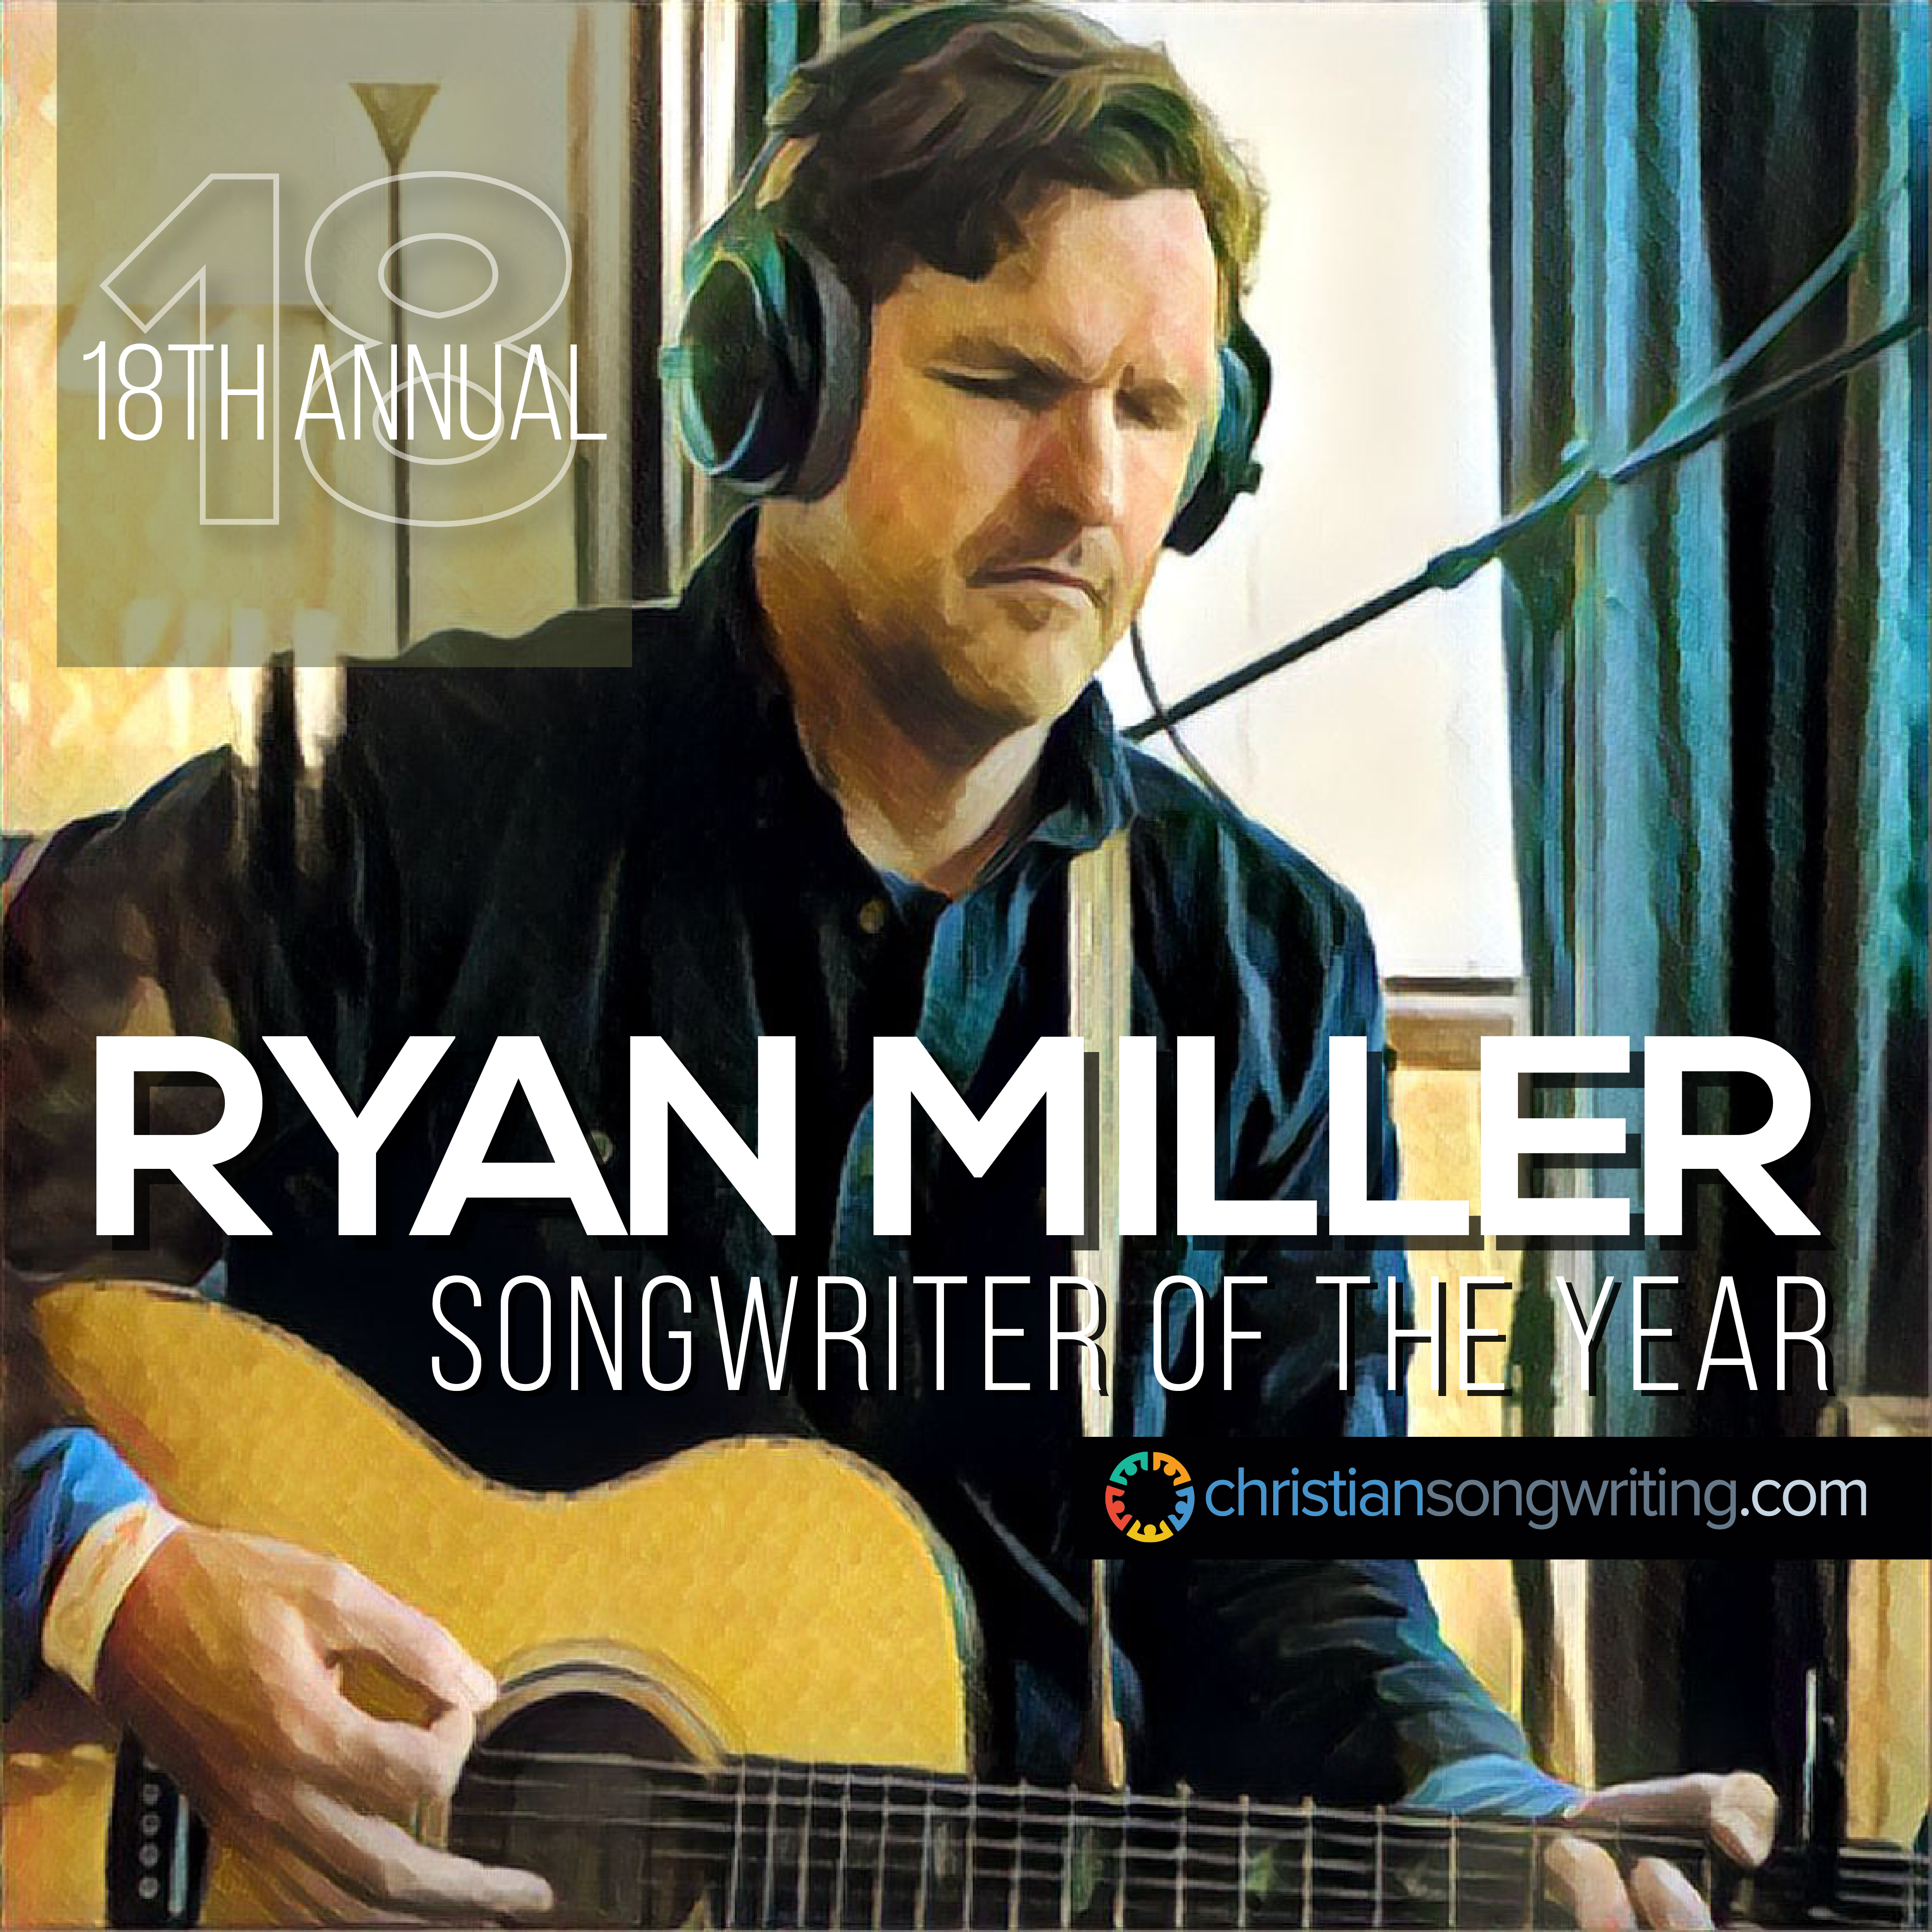 RYAN T. MILLER WINS SONGWRITER OF THE YEAR